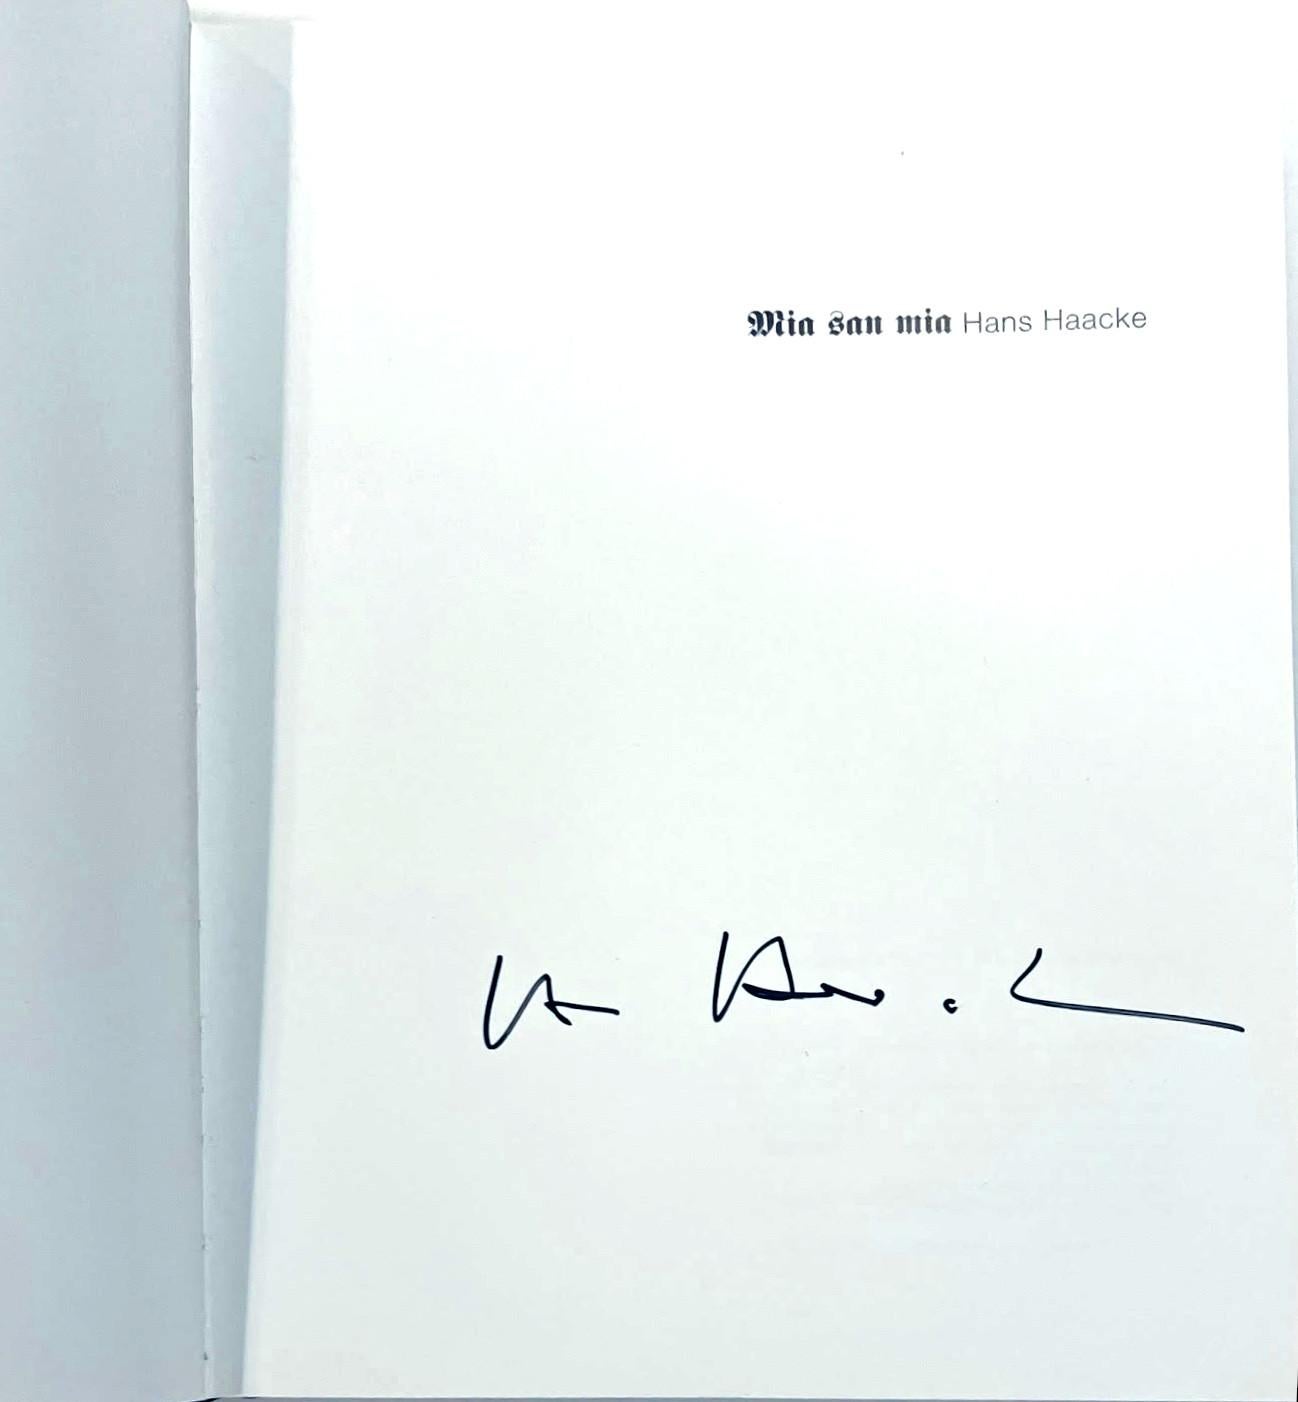 Hans Haacke
Mia San Mia (Hand signed by Hans Haacke), 2001
Hardback monograph (hand signed by Hans Haacke)
Signed by Hans Haacke in black marker on the title page
10 × 8 × 1 inches
Provenance
Hand signed by Hans Haacke for the present owner at a